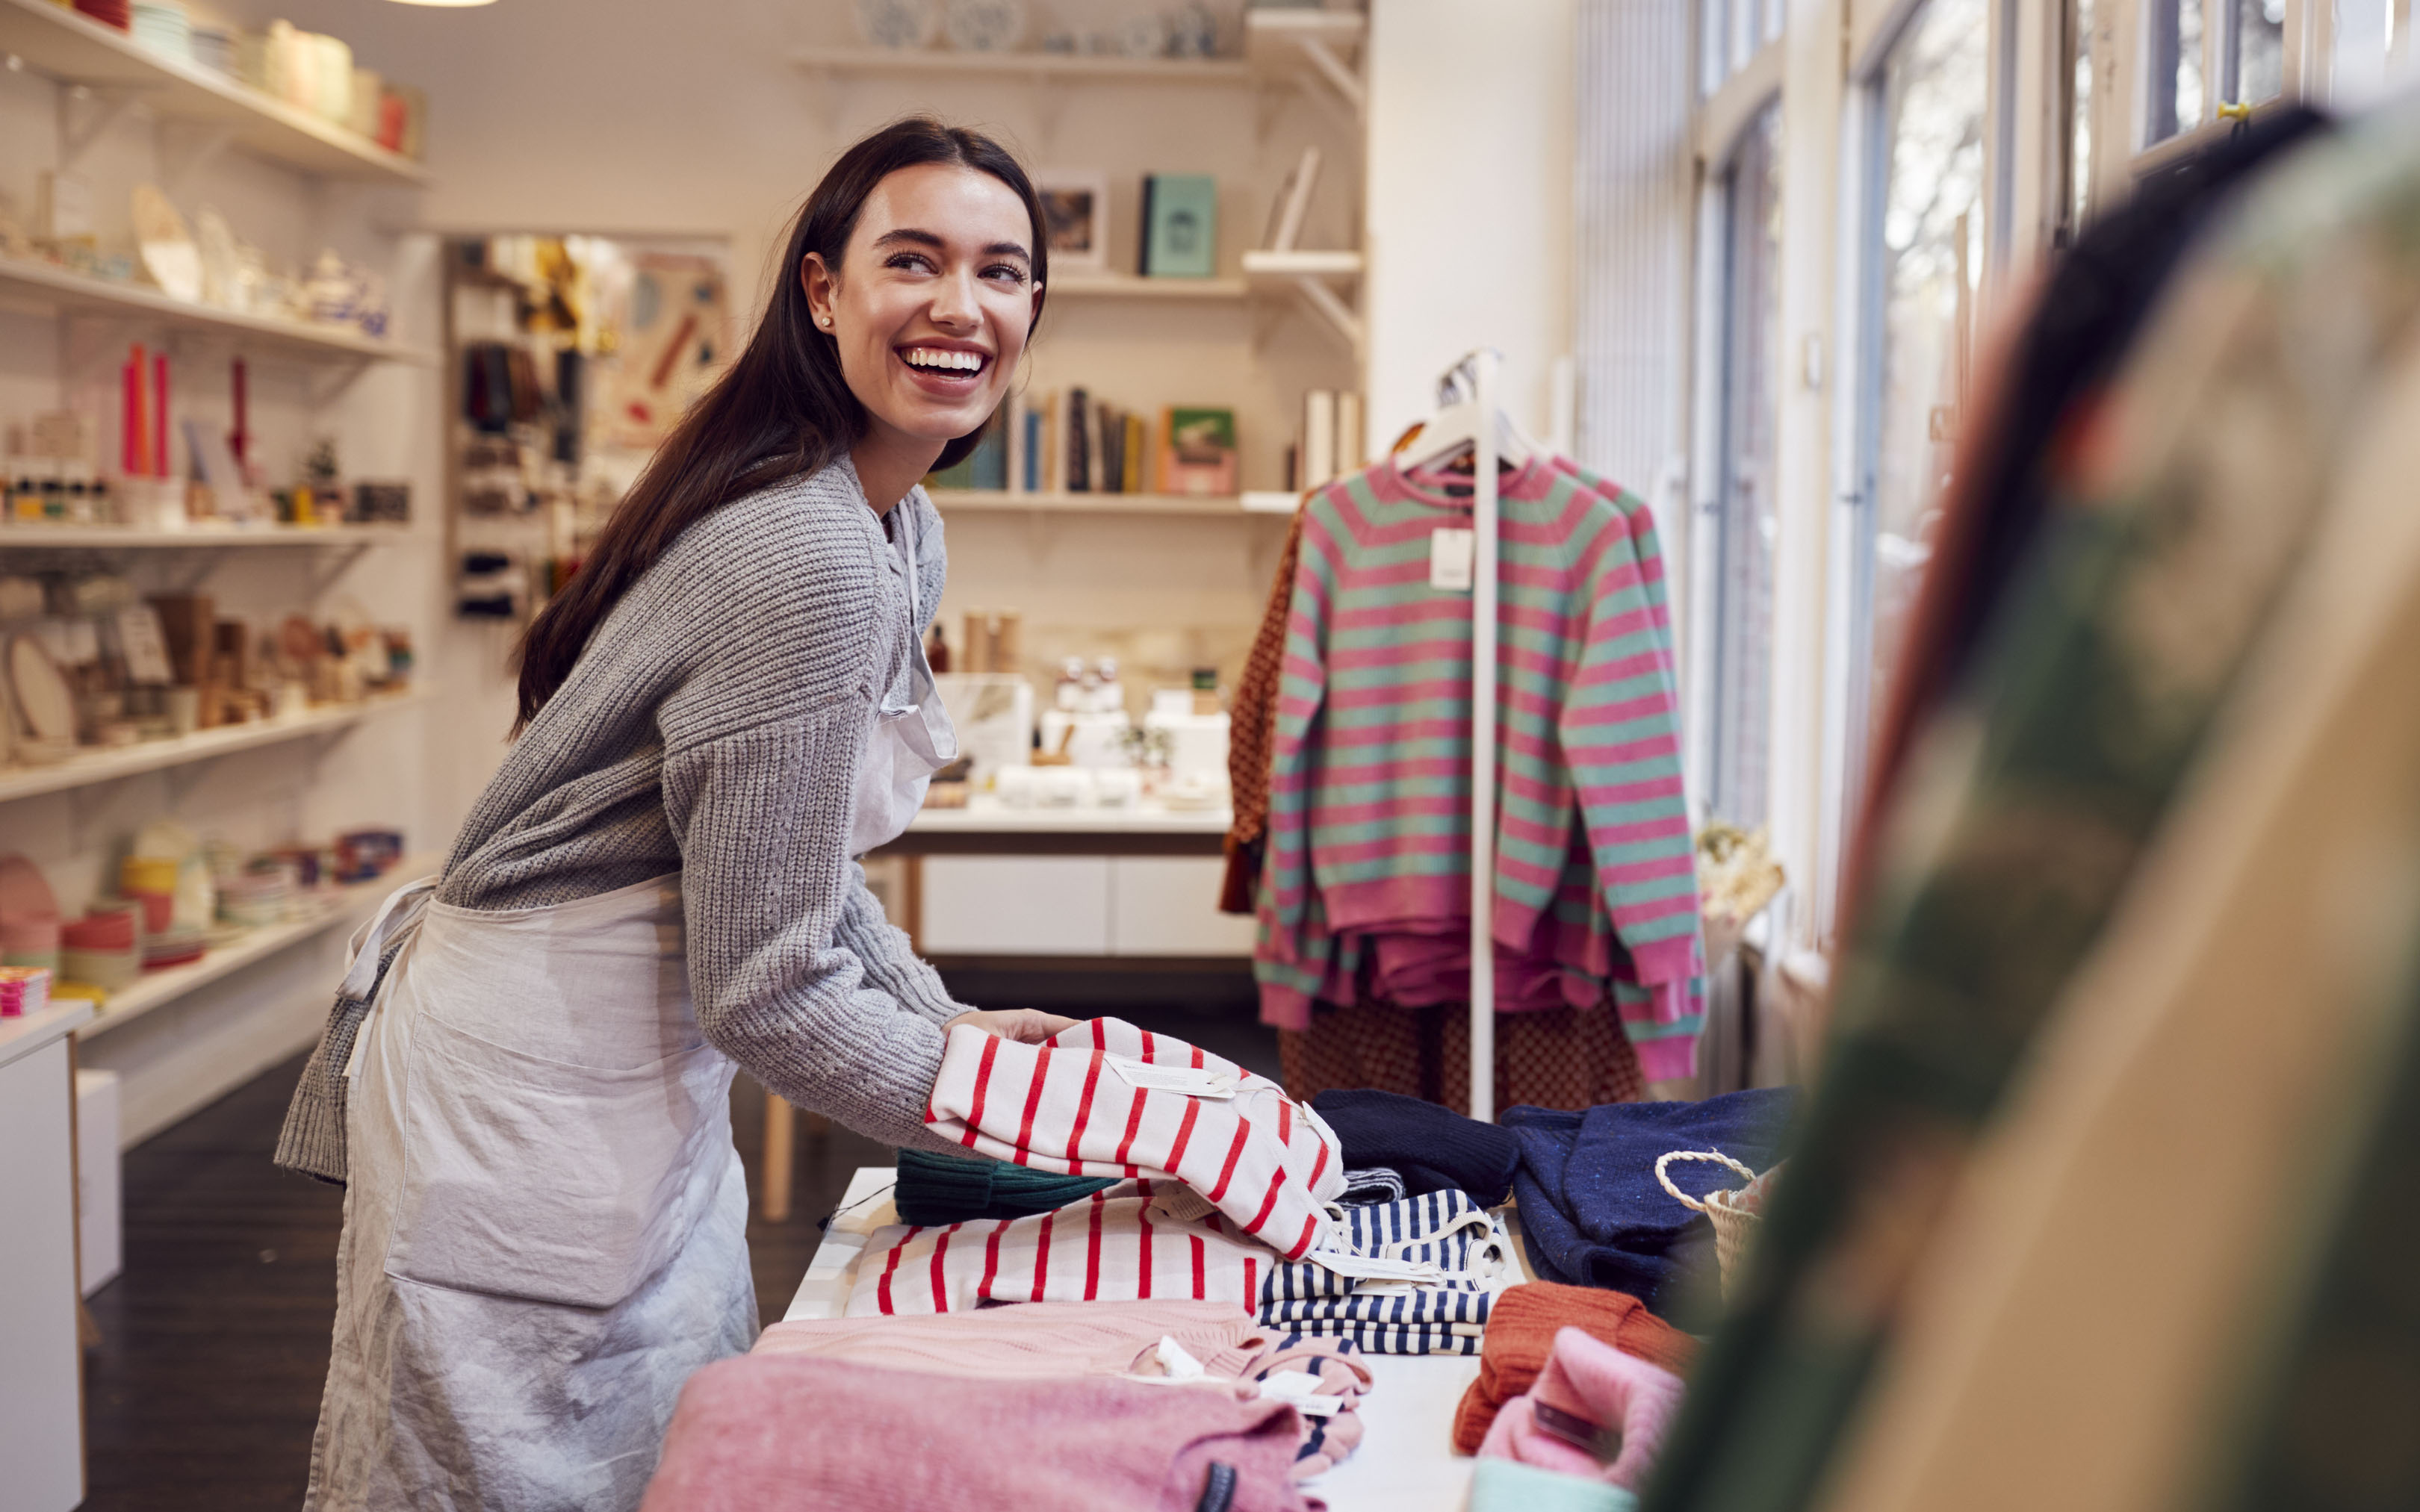 Smiling woman folding clothing items in a clothing store